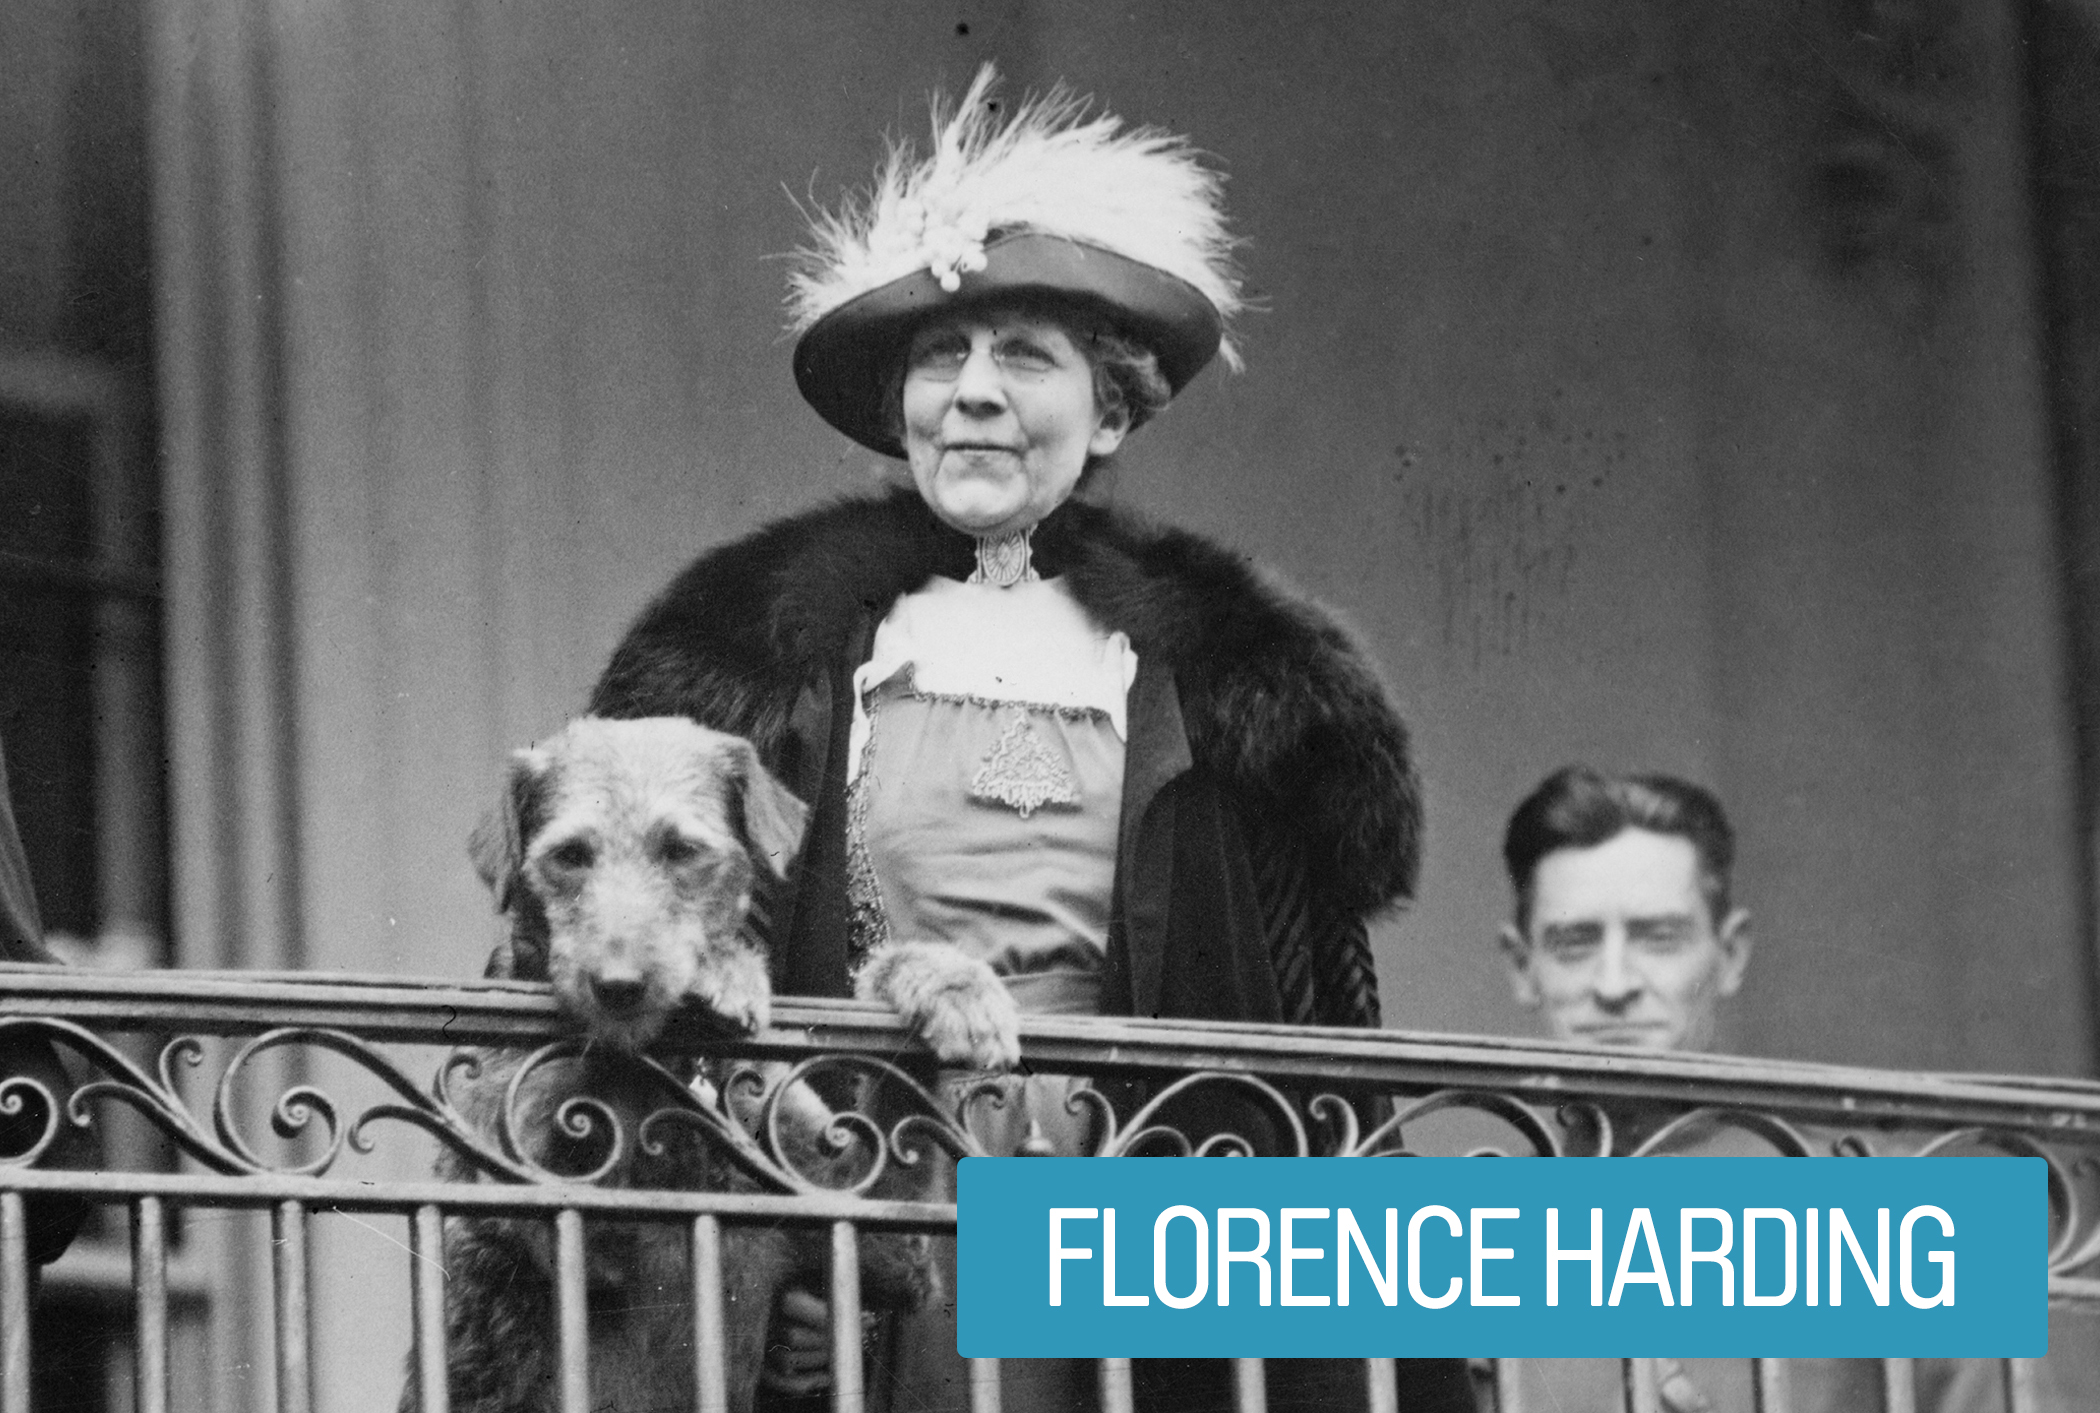 Florence Harding was an advocate for women's equality, acting as a role model  and often pushing for female political appointments. She was a radical supporter of the ASPCA and encouraged the humane treatment of animals. She also routinely visited veteran hospital wards to ensure patients received quality care and proper benefits.